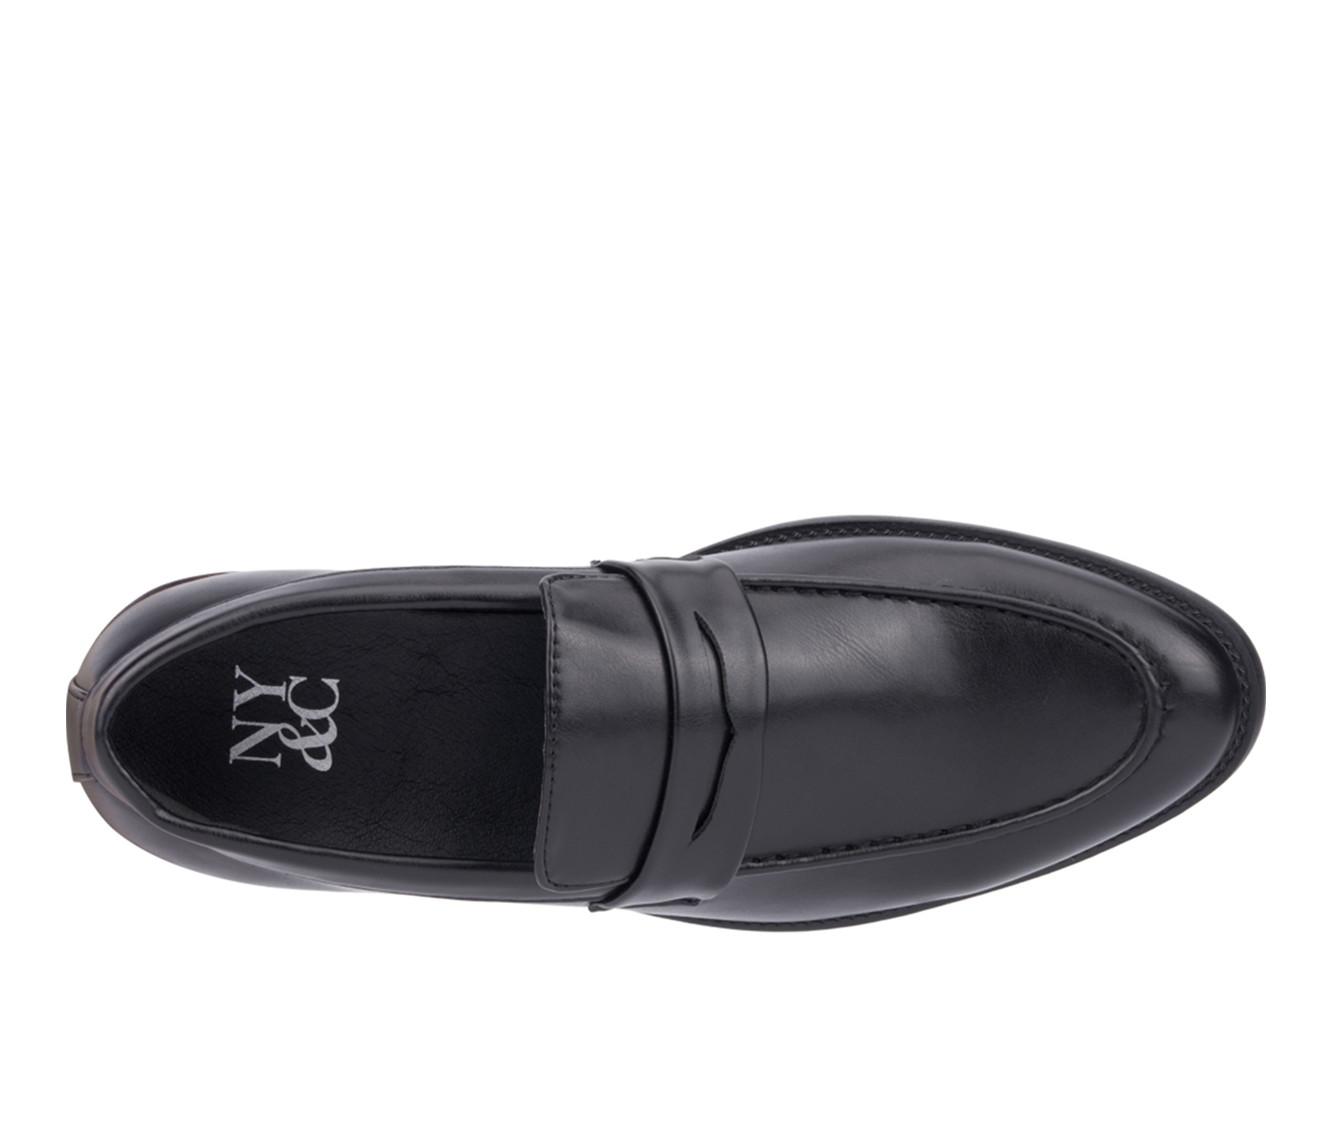 Men's New York and Company Andy Dress Loafers